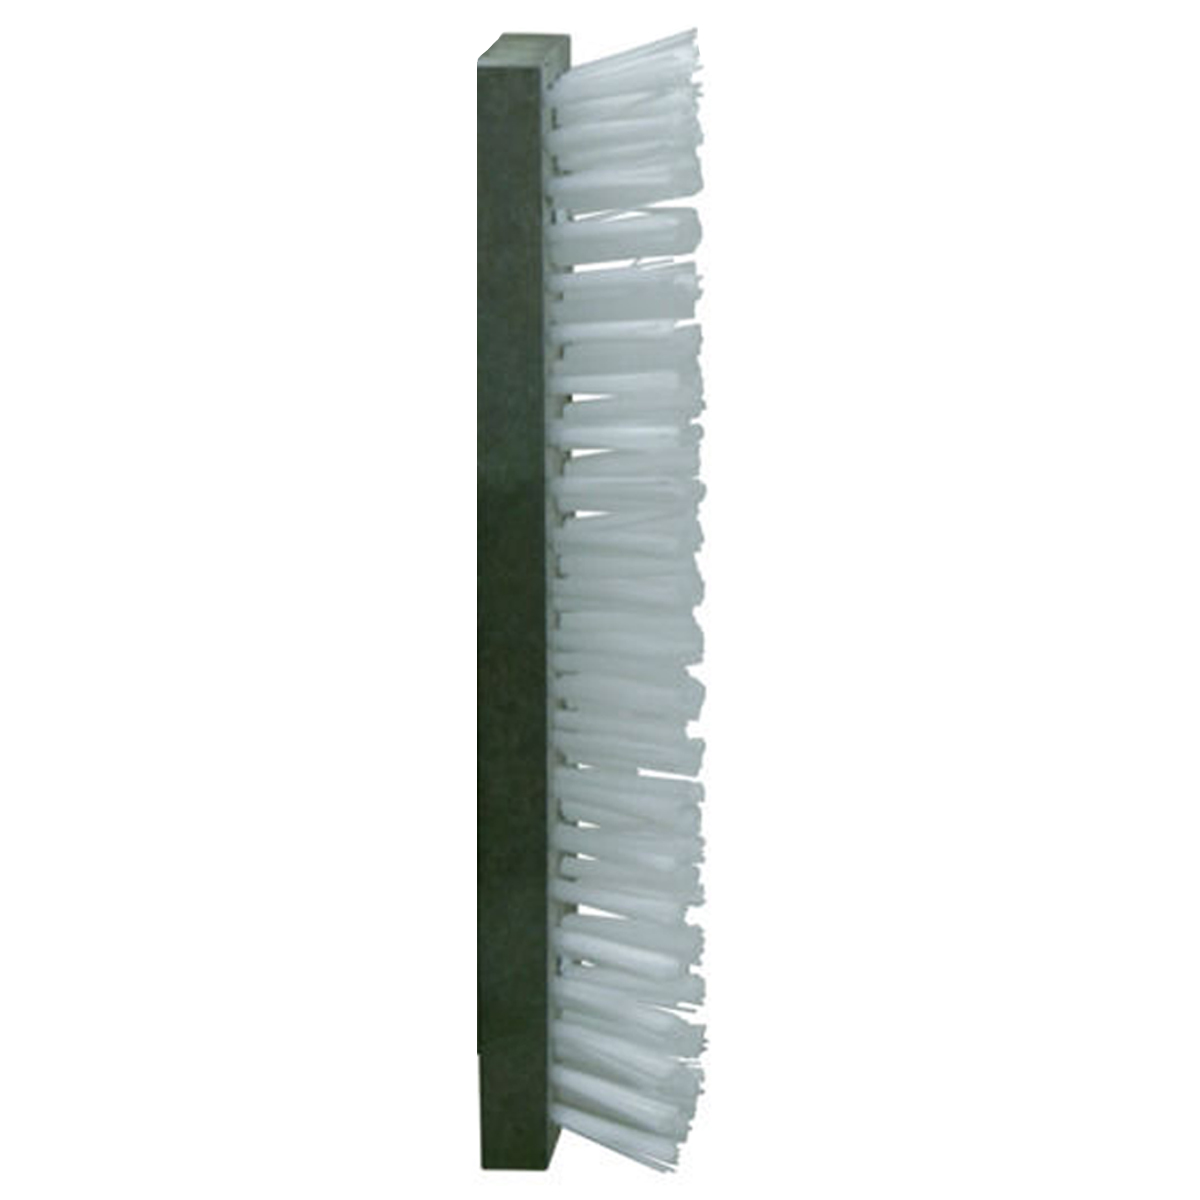 Replacement brush for cattle & cow brush